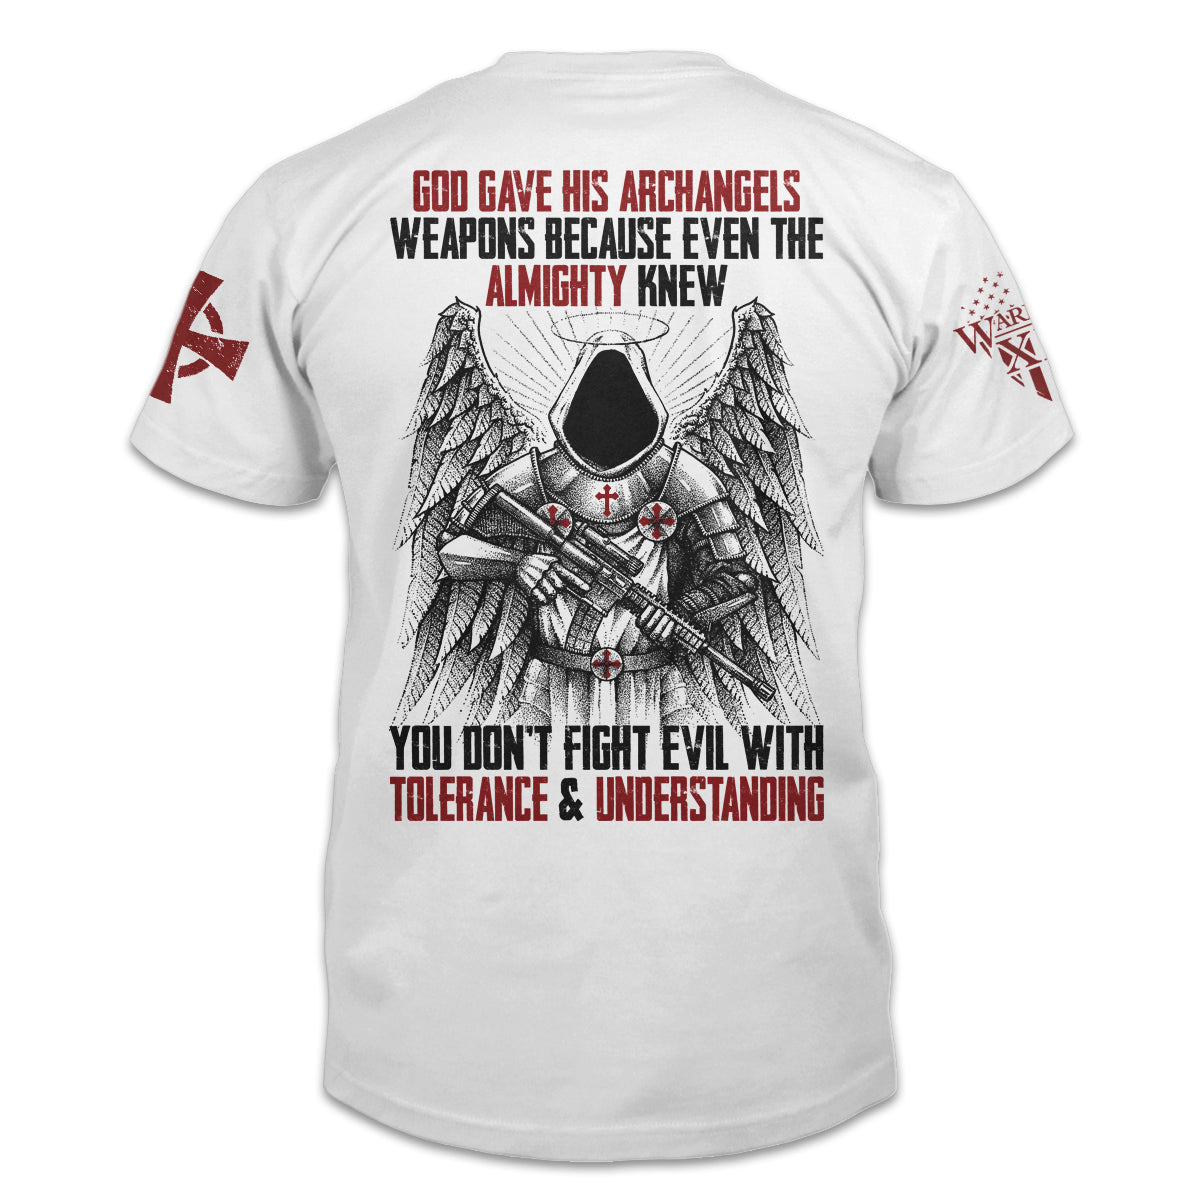 A white t-shirt with the words "God gave his archangels weapons, because even the Almighty knew you don't fight evil with tolerance and understanding" with an Archangel holding a gun printed on the back of the shirt.